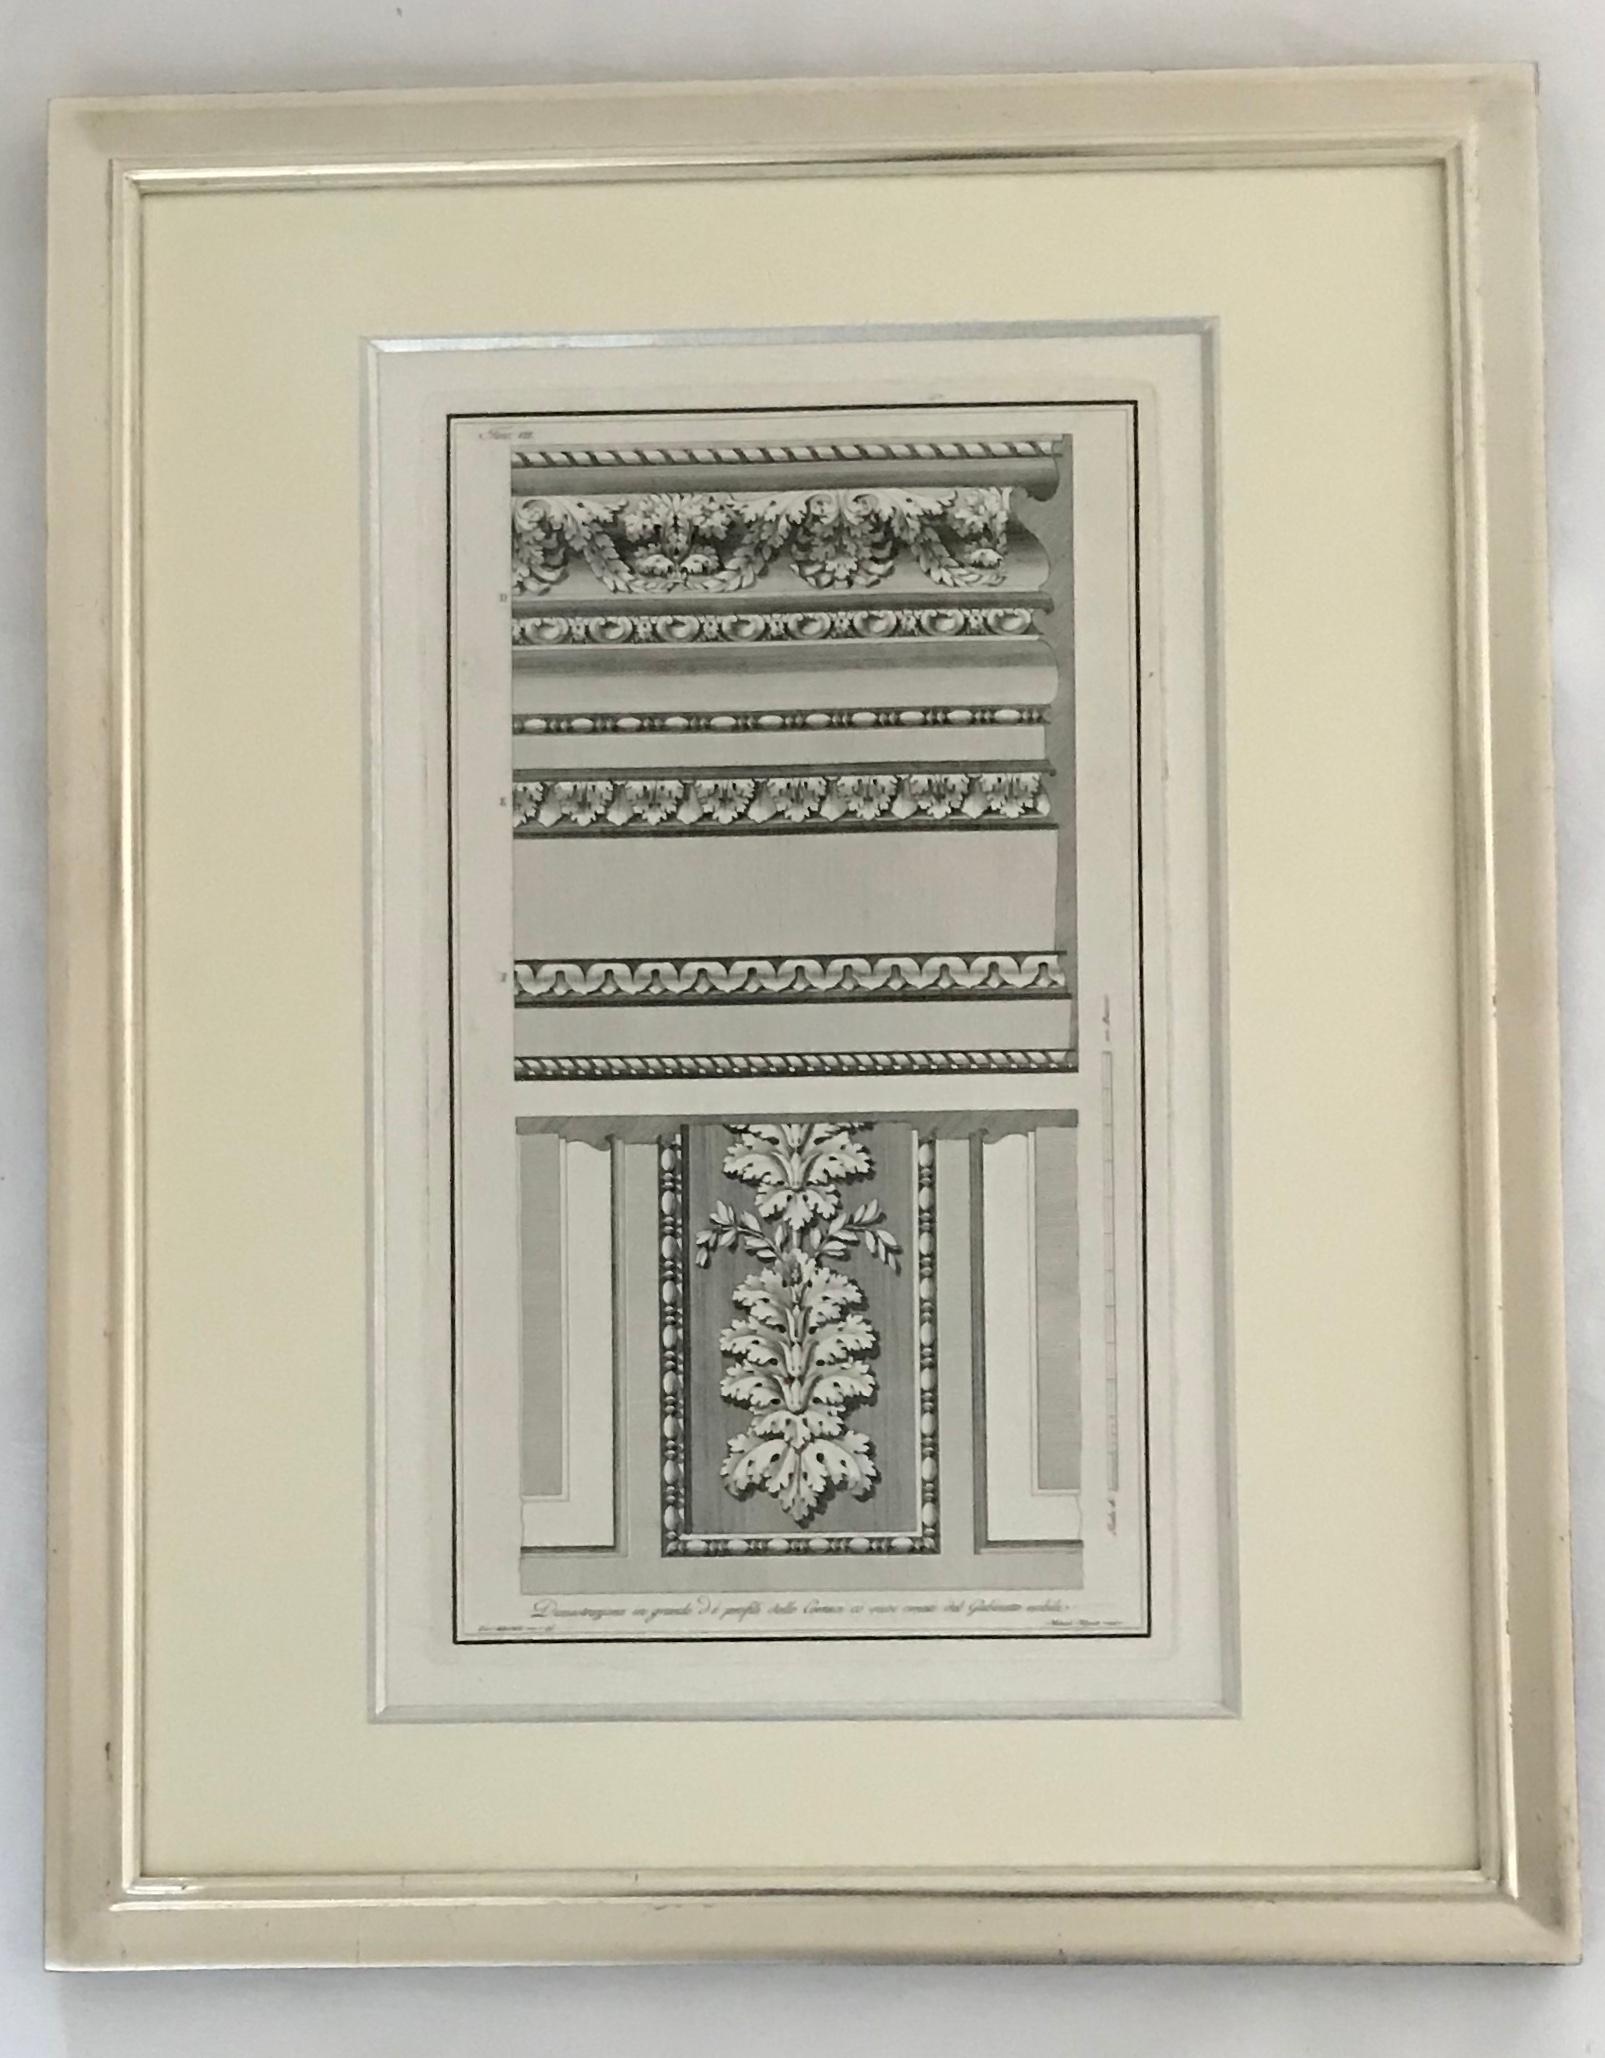 Architectural designs. A set of nine architectural engravings. For Sale 4